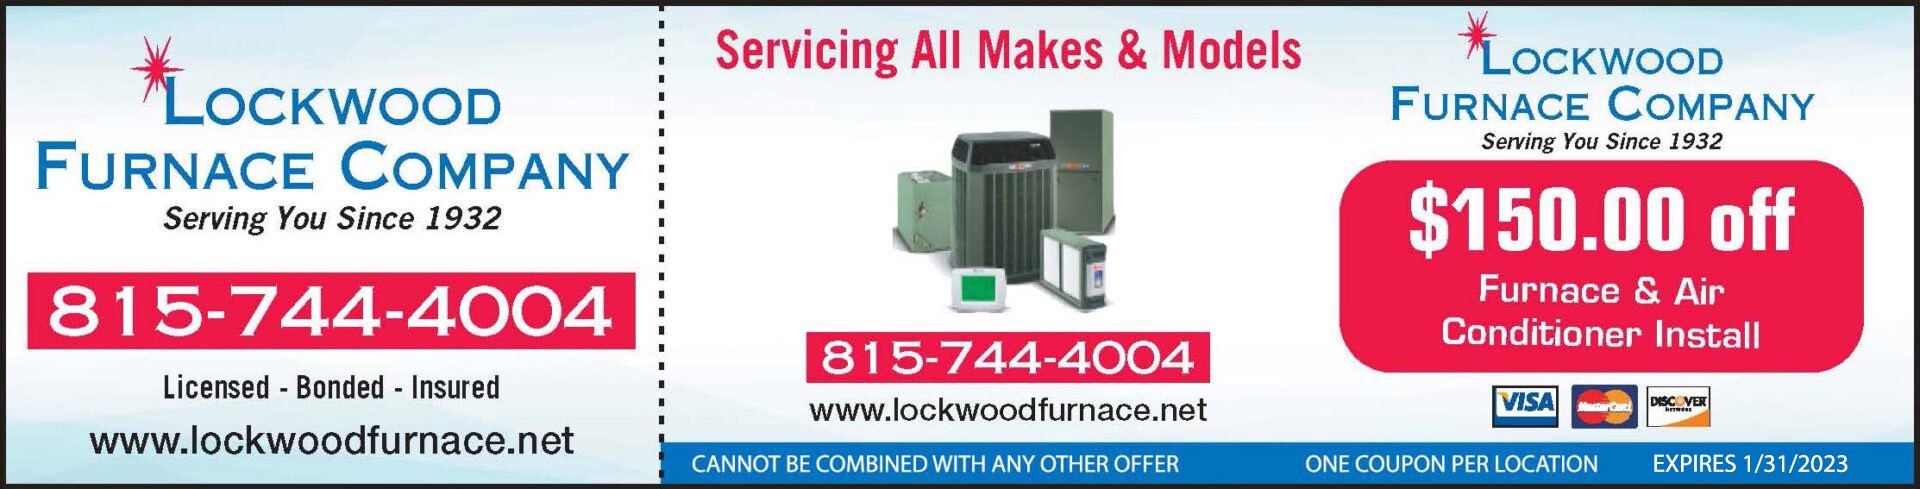 Furnace & Air Conditioner Install - $150 Off - Lockwood Furnace Company